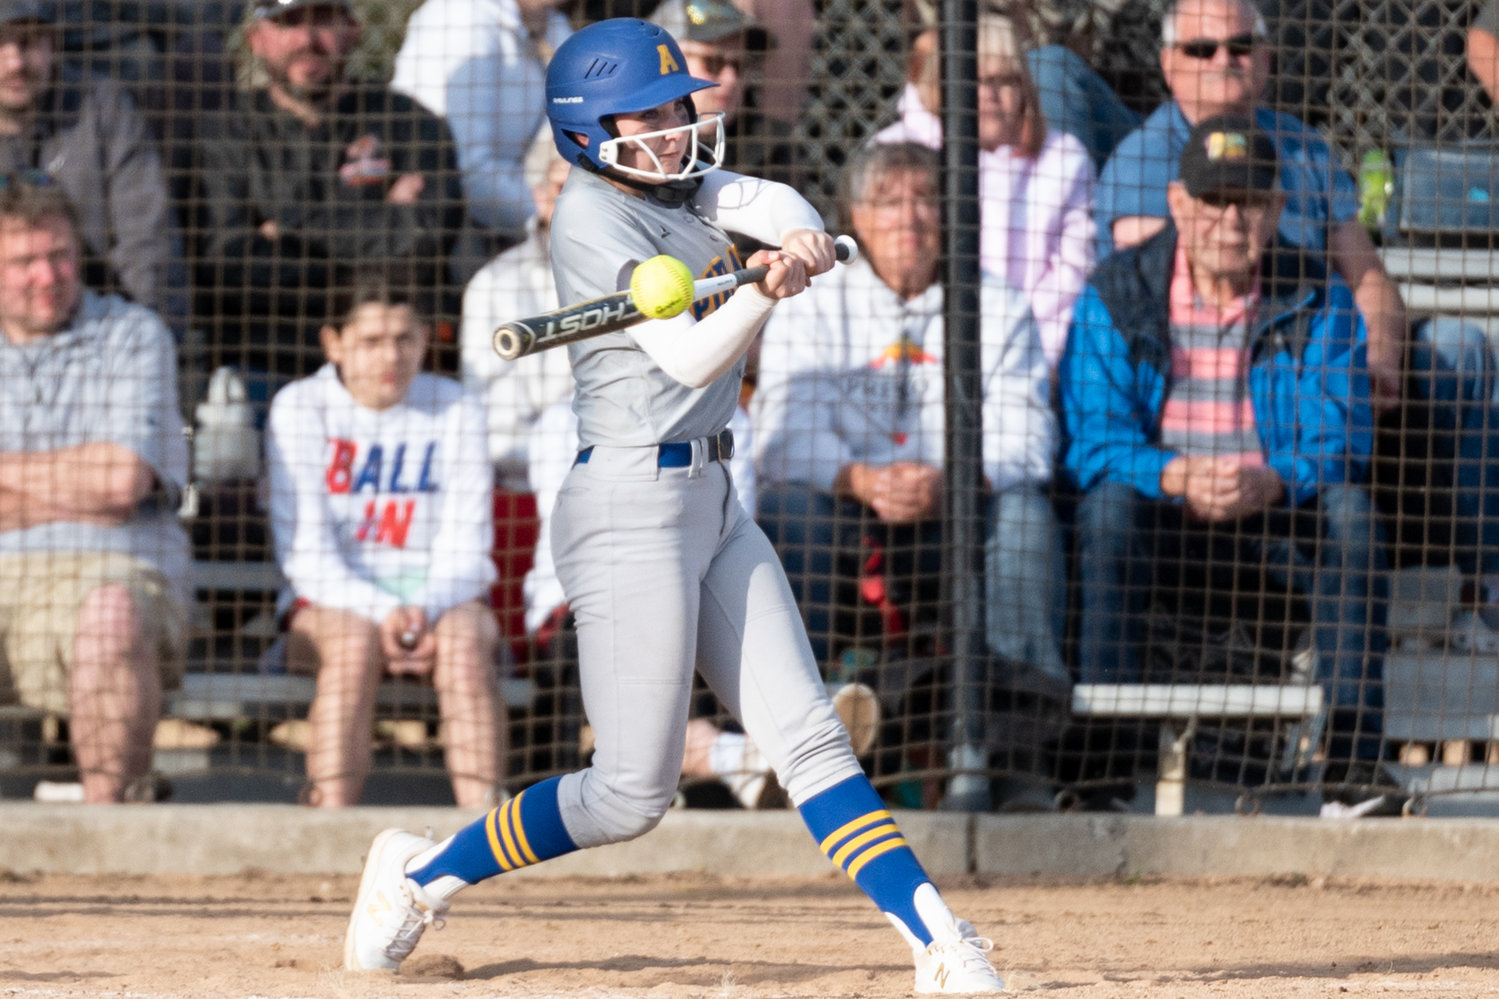 Adna's Danika Hallom makes contact with a pitch against PWV in the 2B District 4 softball championship game at Fort Borst Park in Centralia May 21.